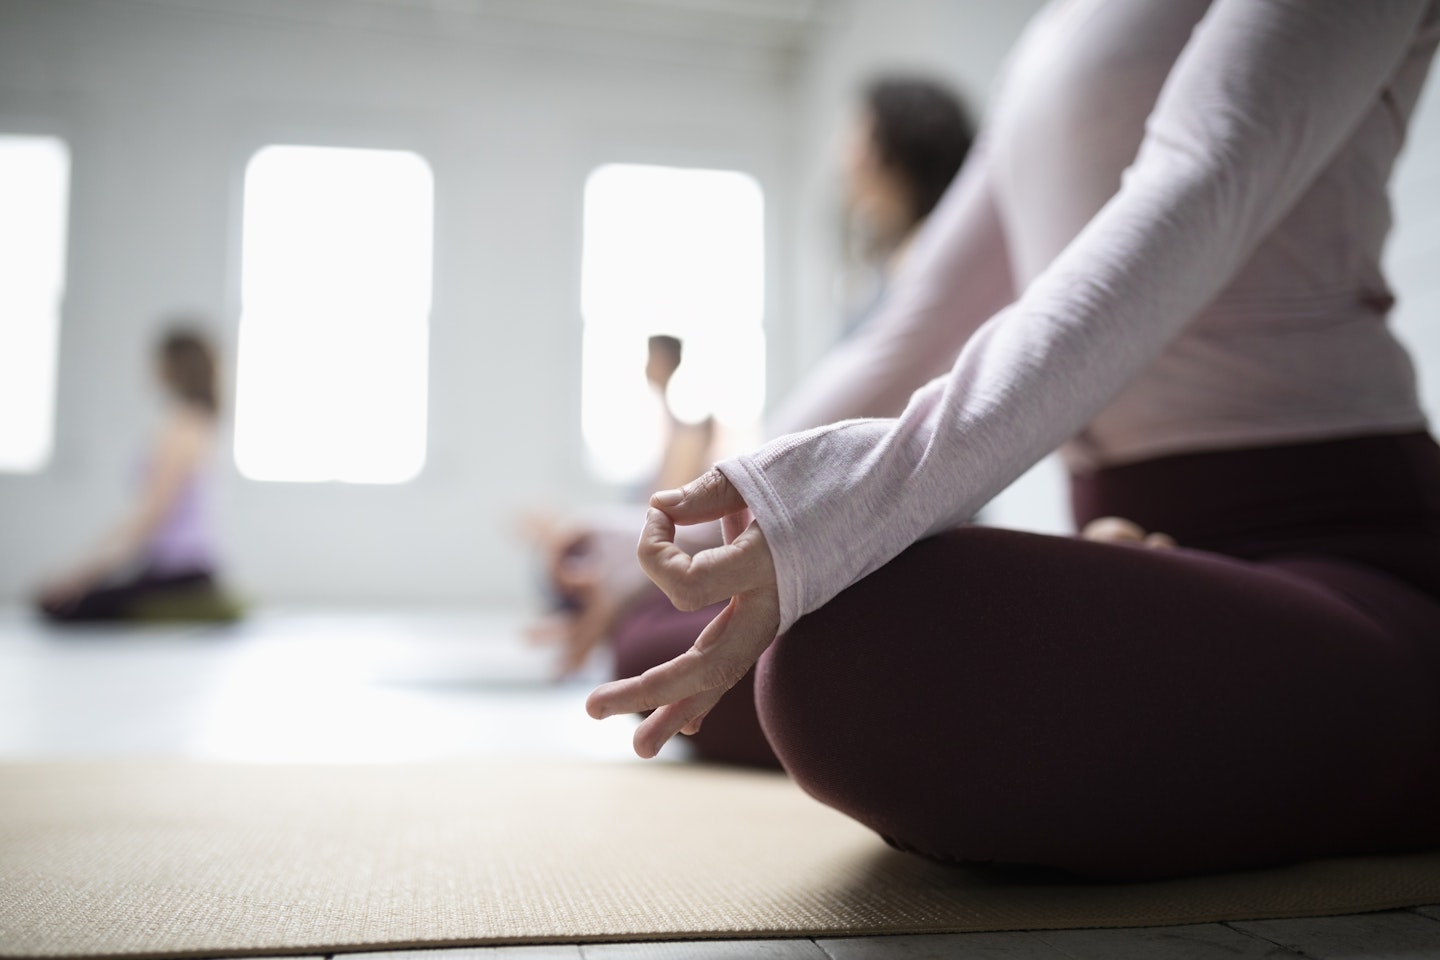 Take part in relaxing activities such as yoga and meditation